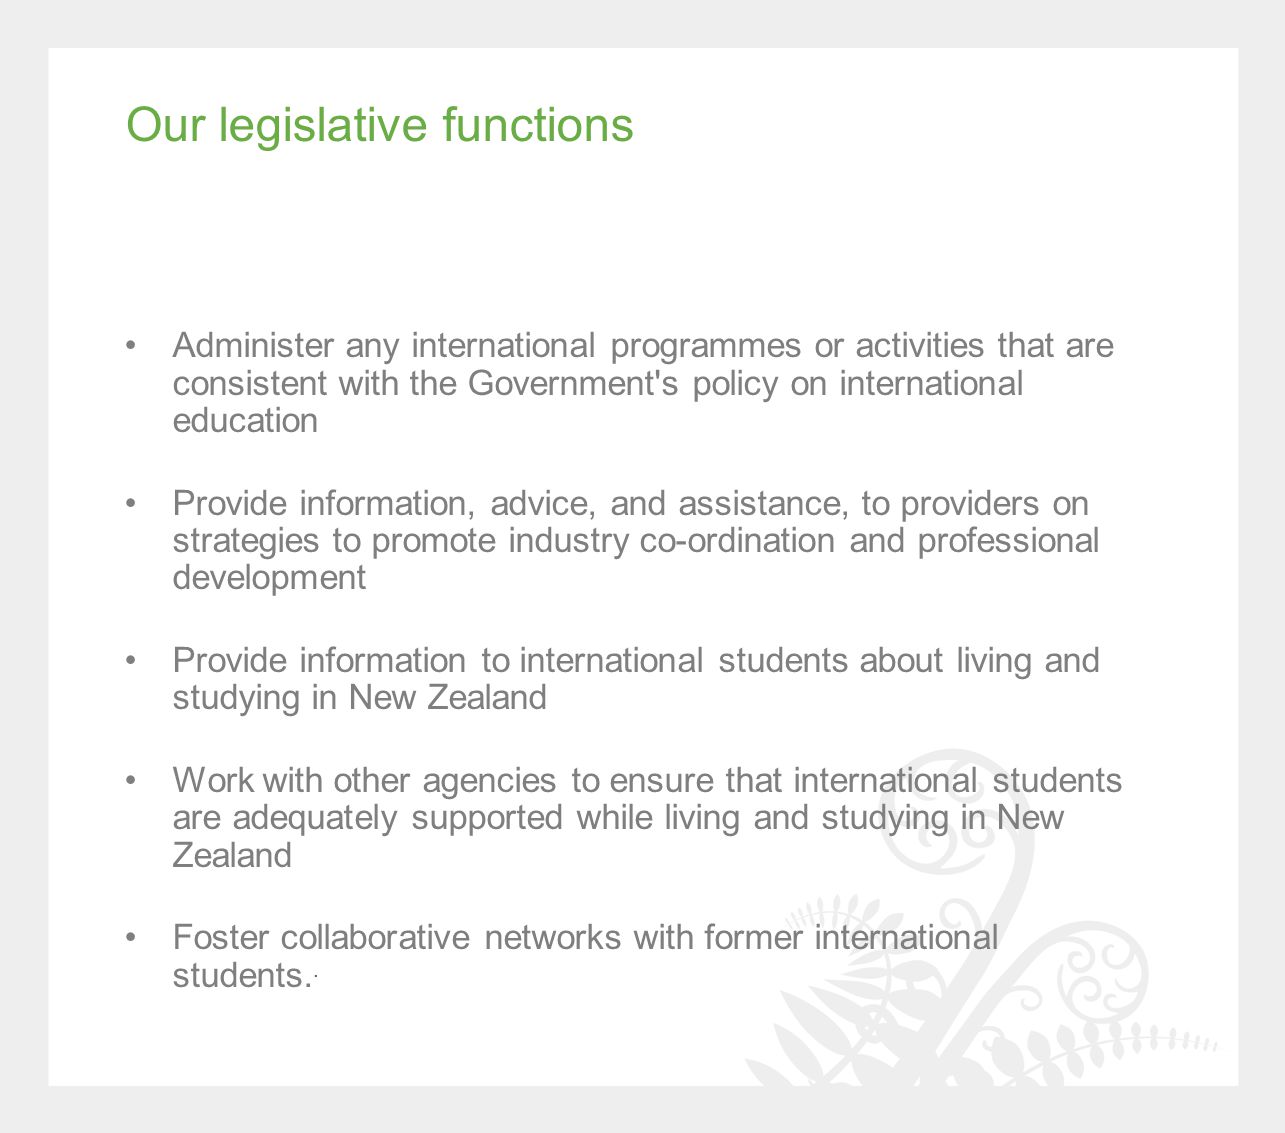 Our legislative functions Administer any international programmes or activities that are consistent with the Government s policy on international education Provide information, advice, and assistance, to providers on strategies to promote industry co-ordination and professional development Provide information to international students about living and studying in New Zealand Work with other agencies to ensure that international students are adequately supported while living and studying in New Zealand Foster collaborative networks with former international students..